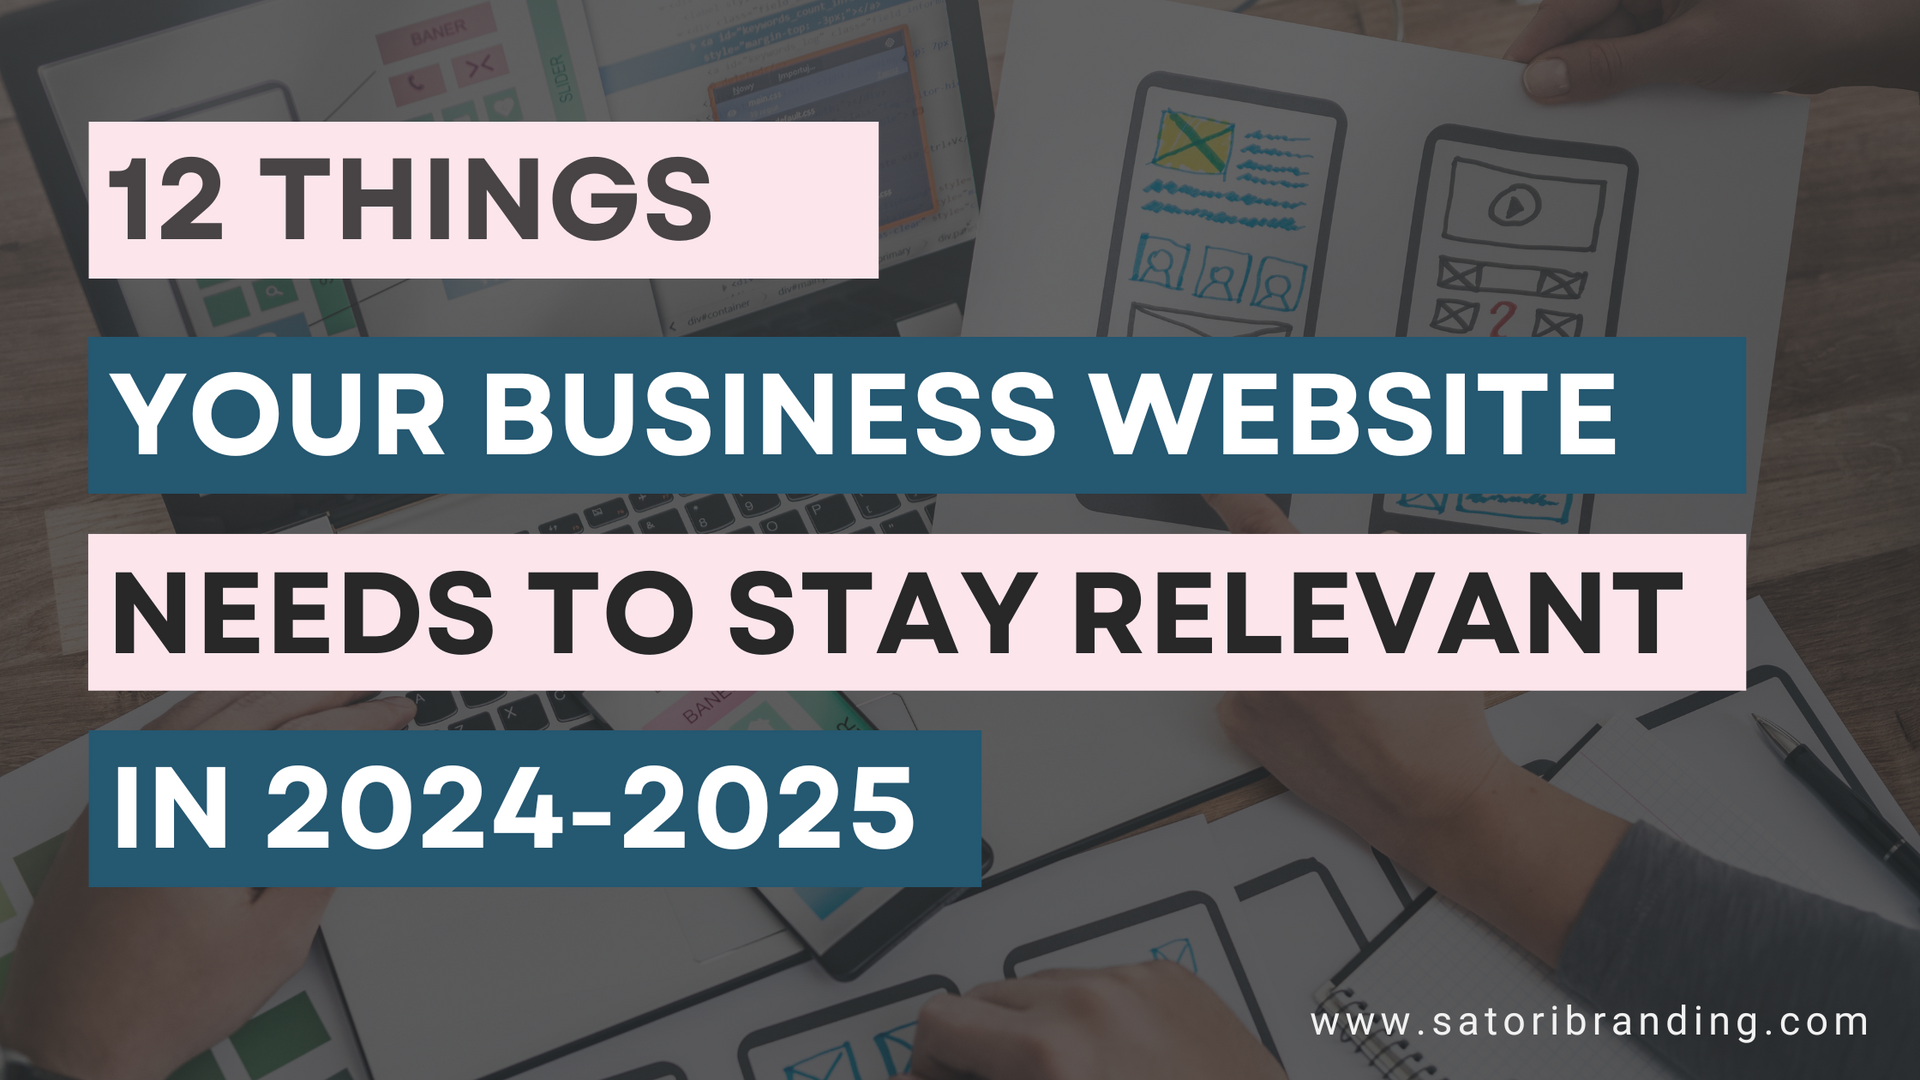 Satori branding and Digital Marketing Blog Cover Image | 10 things your business website needs to stay relevant in 2024-2025